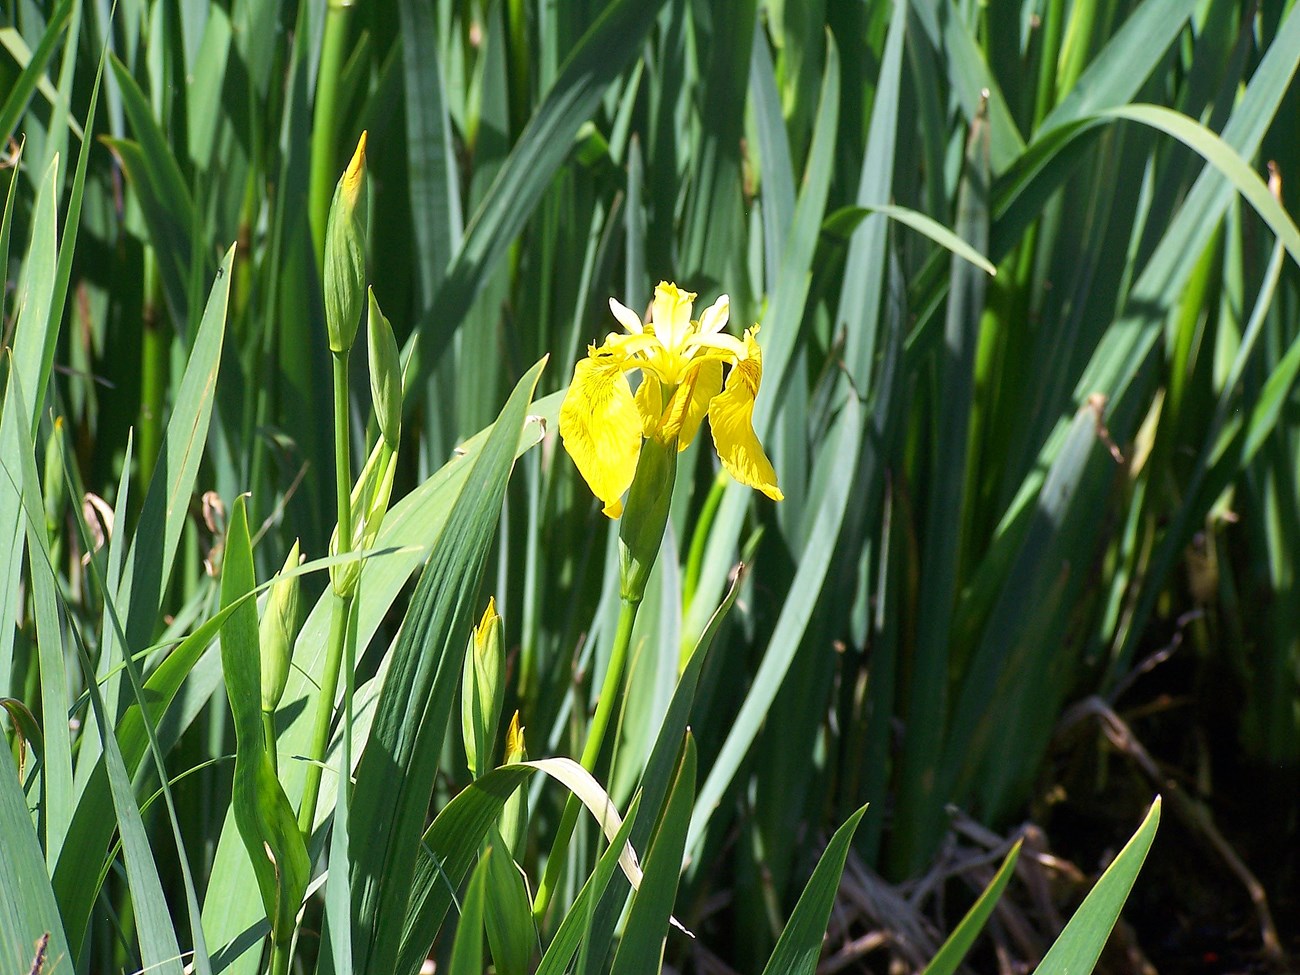 Yellow flower with green stalk amid many green stalks.